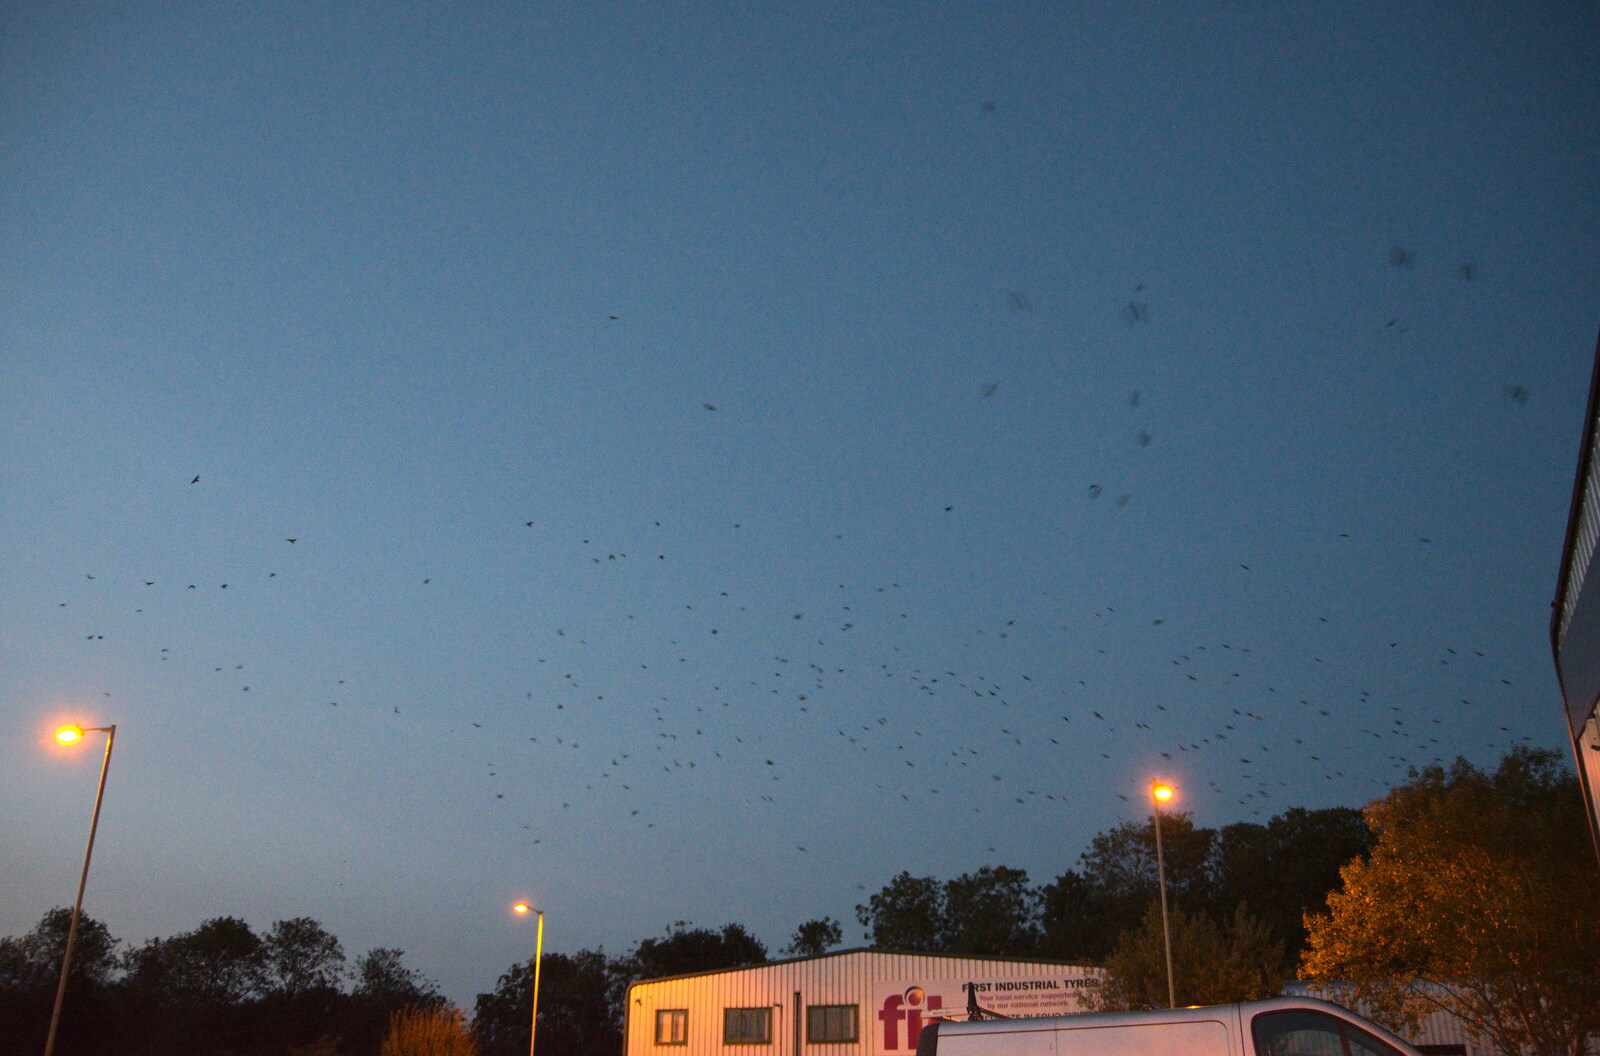 There's a swarm of crows flying over Station 119 from Cycling Eye Airfield and Station 119, Eye, Suffolk - 9th September 2020